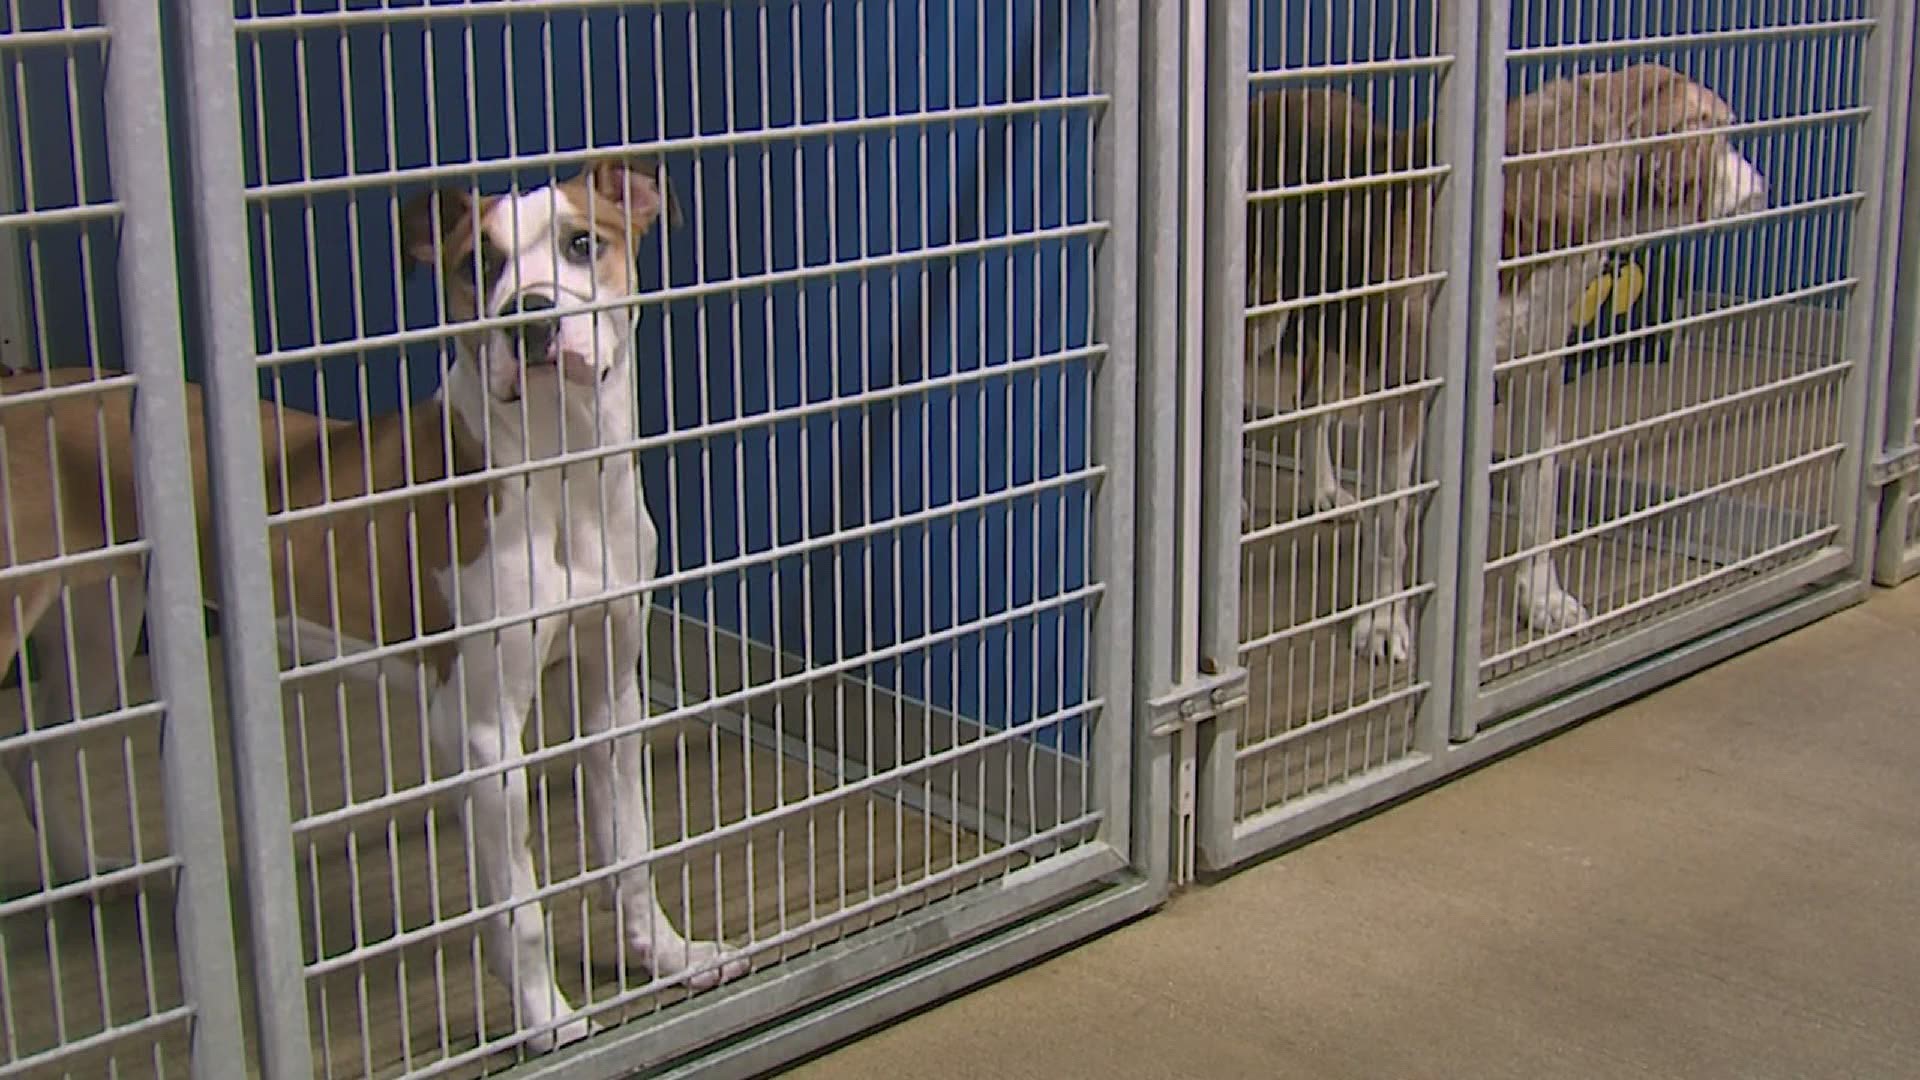 Instead the stores will have to get dogs from shelters